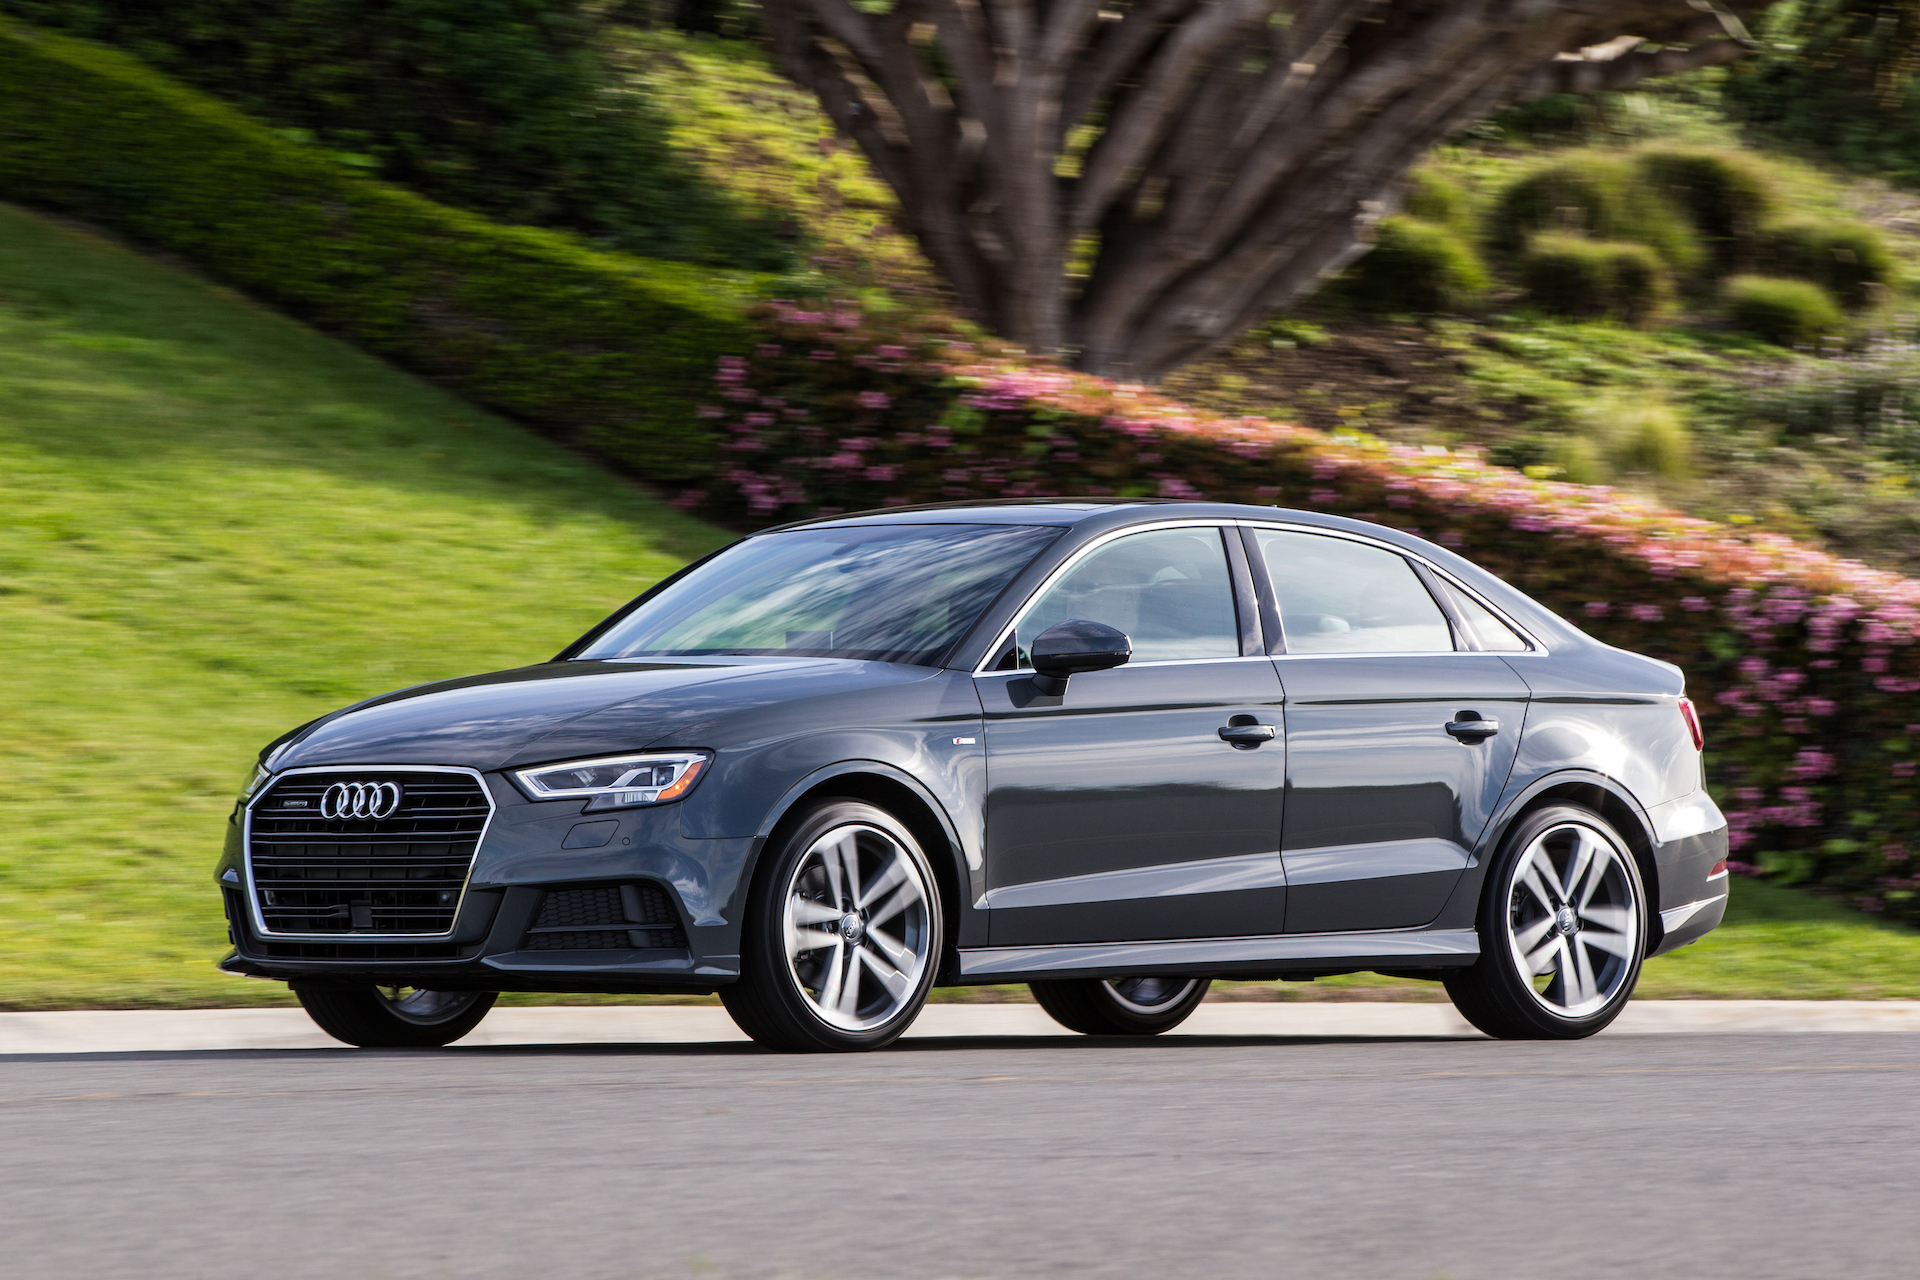 2019 Audi A3 Review, Ratings, Specs, Prices, and Photos - The Car Connection